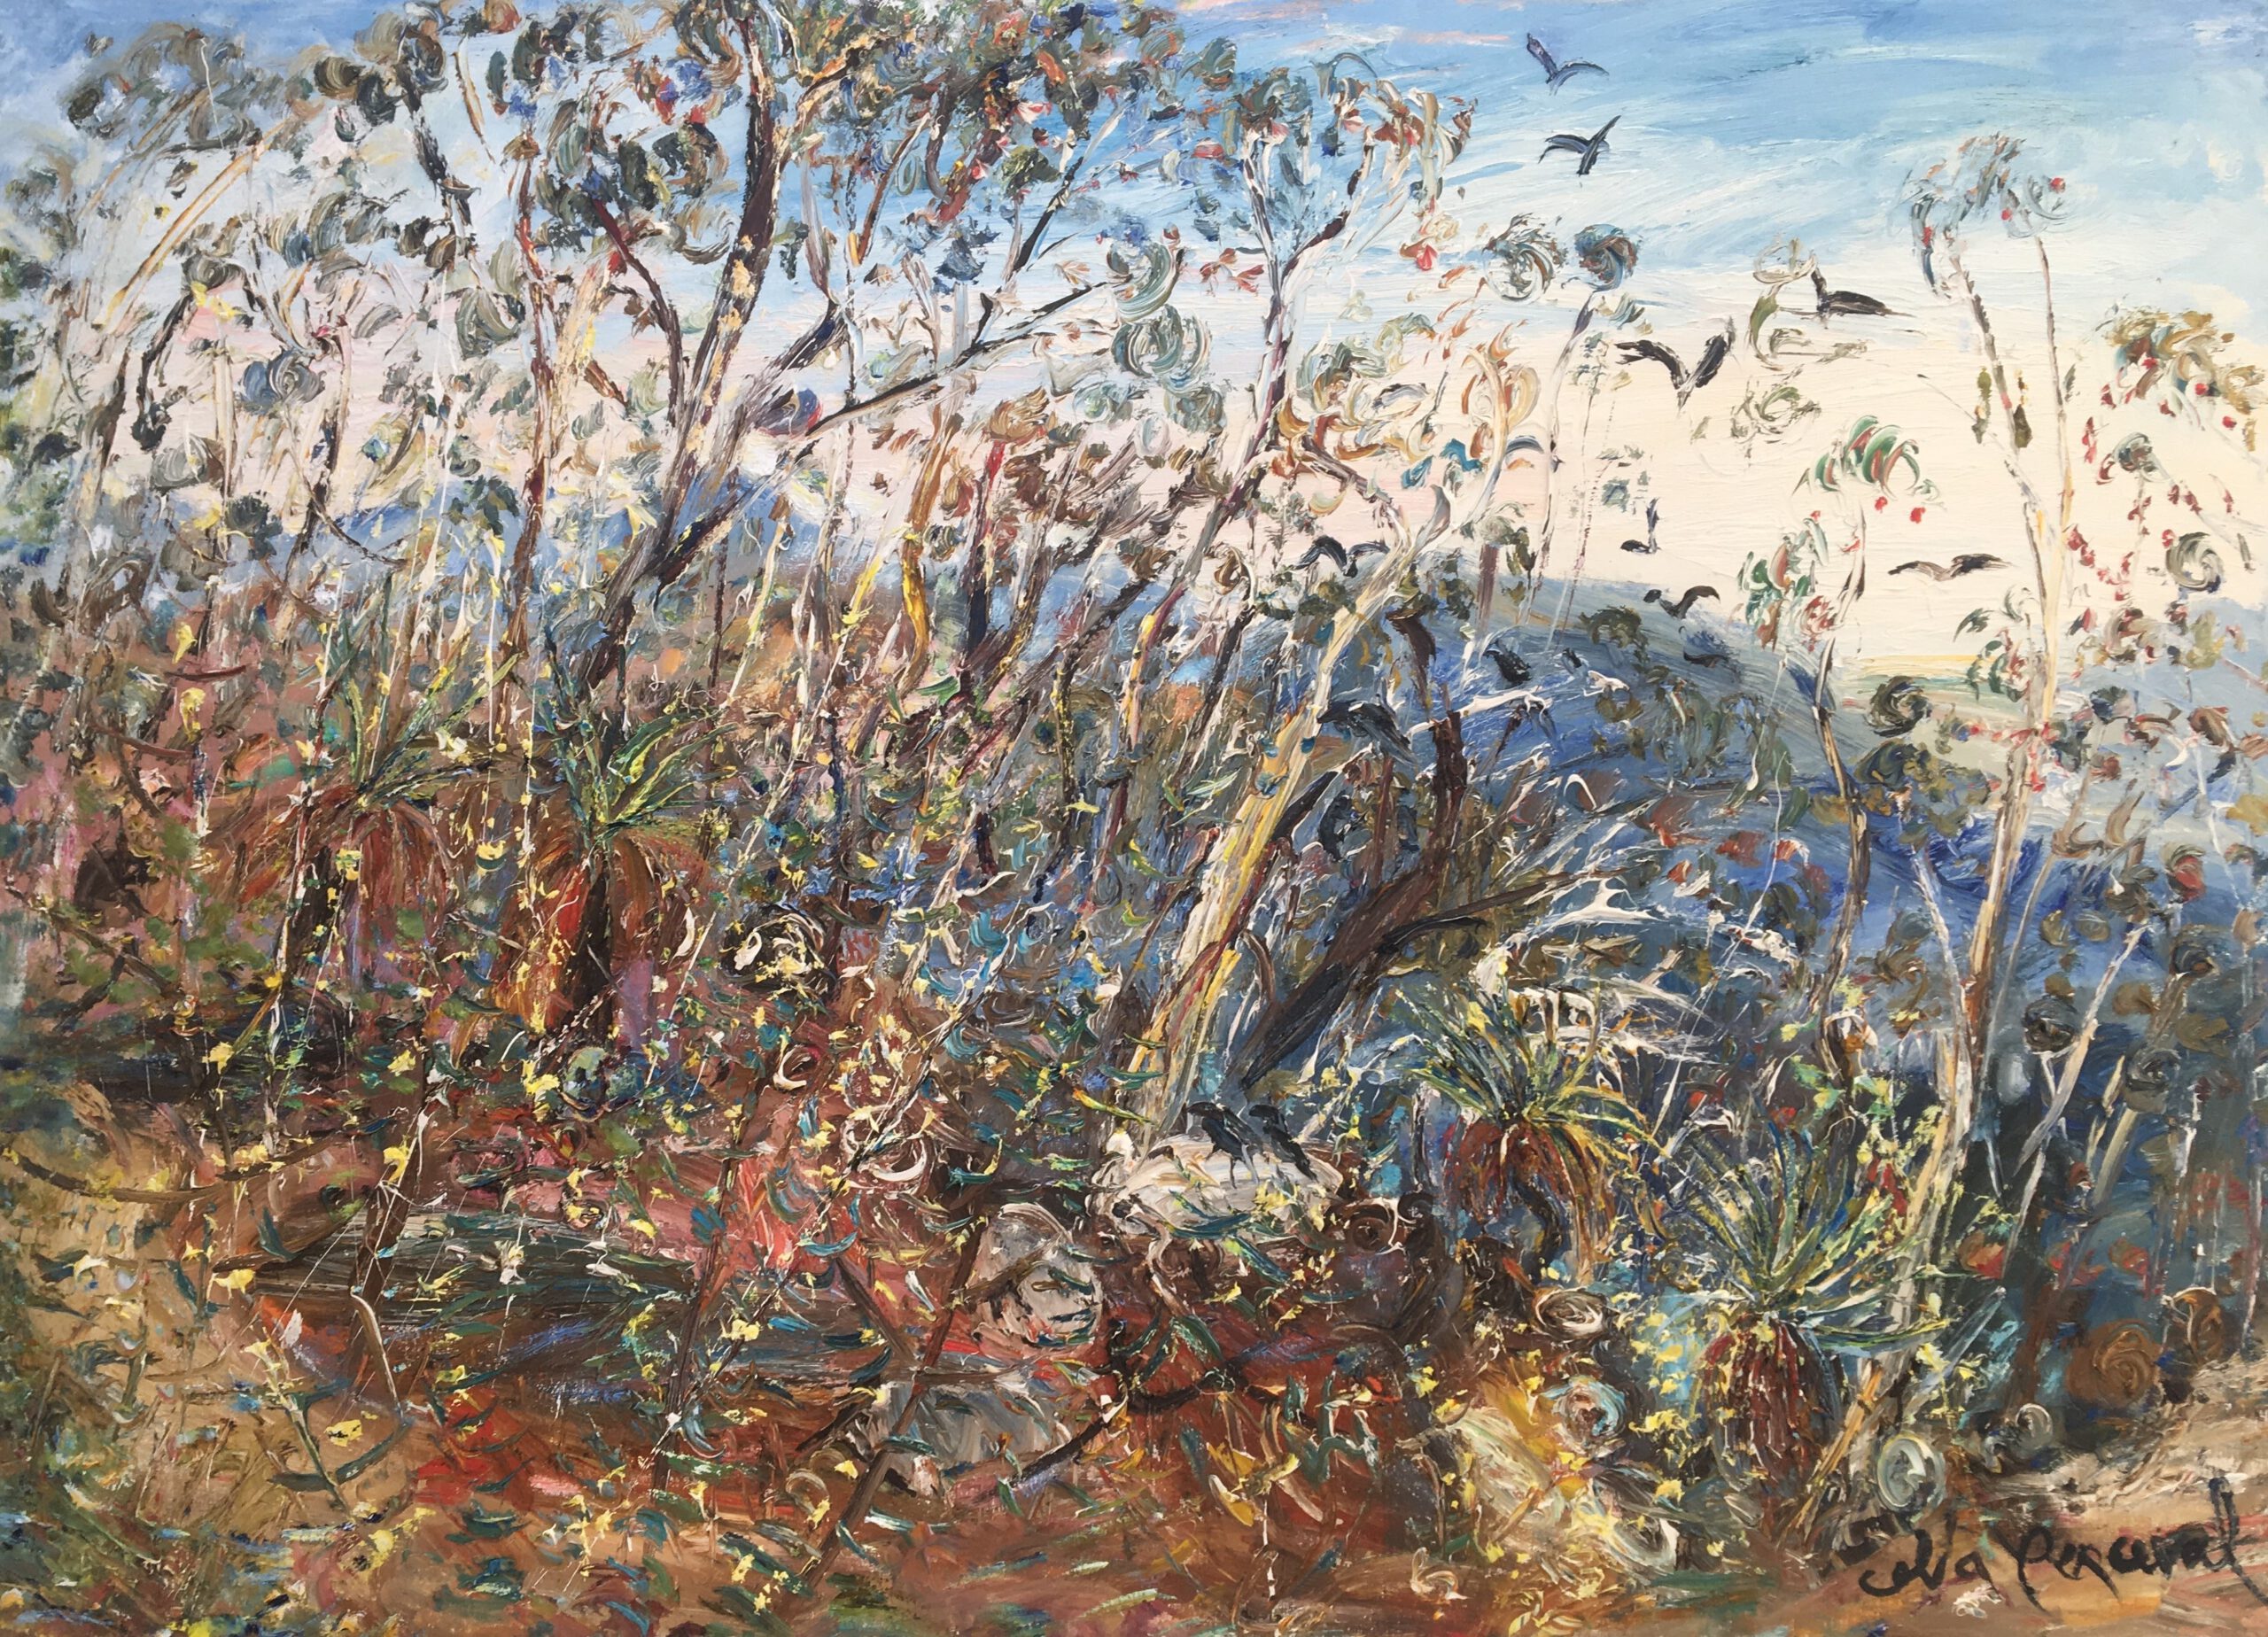 Celia Perceval 'Yowaka Ranges Above the Coast with Wattle and Grass Trees' oil on canvas 102 x 138cm $22,000